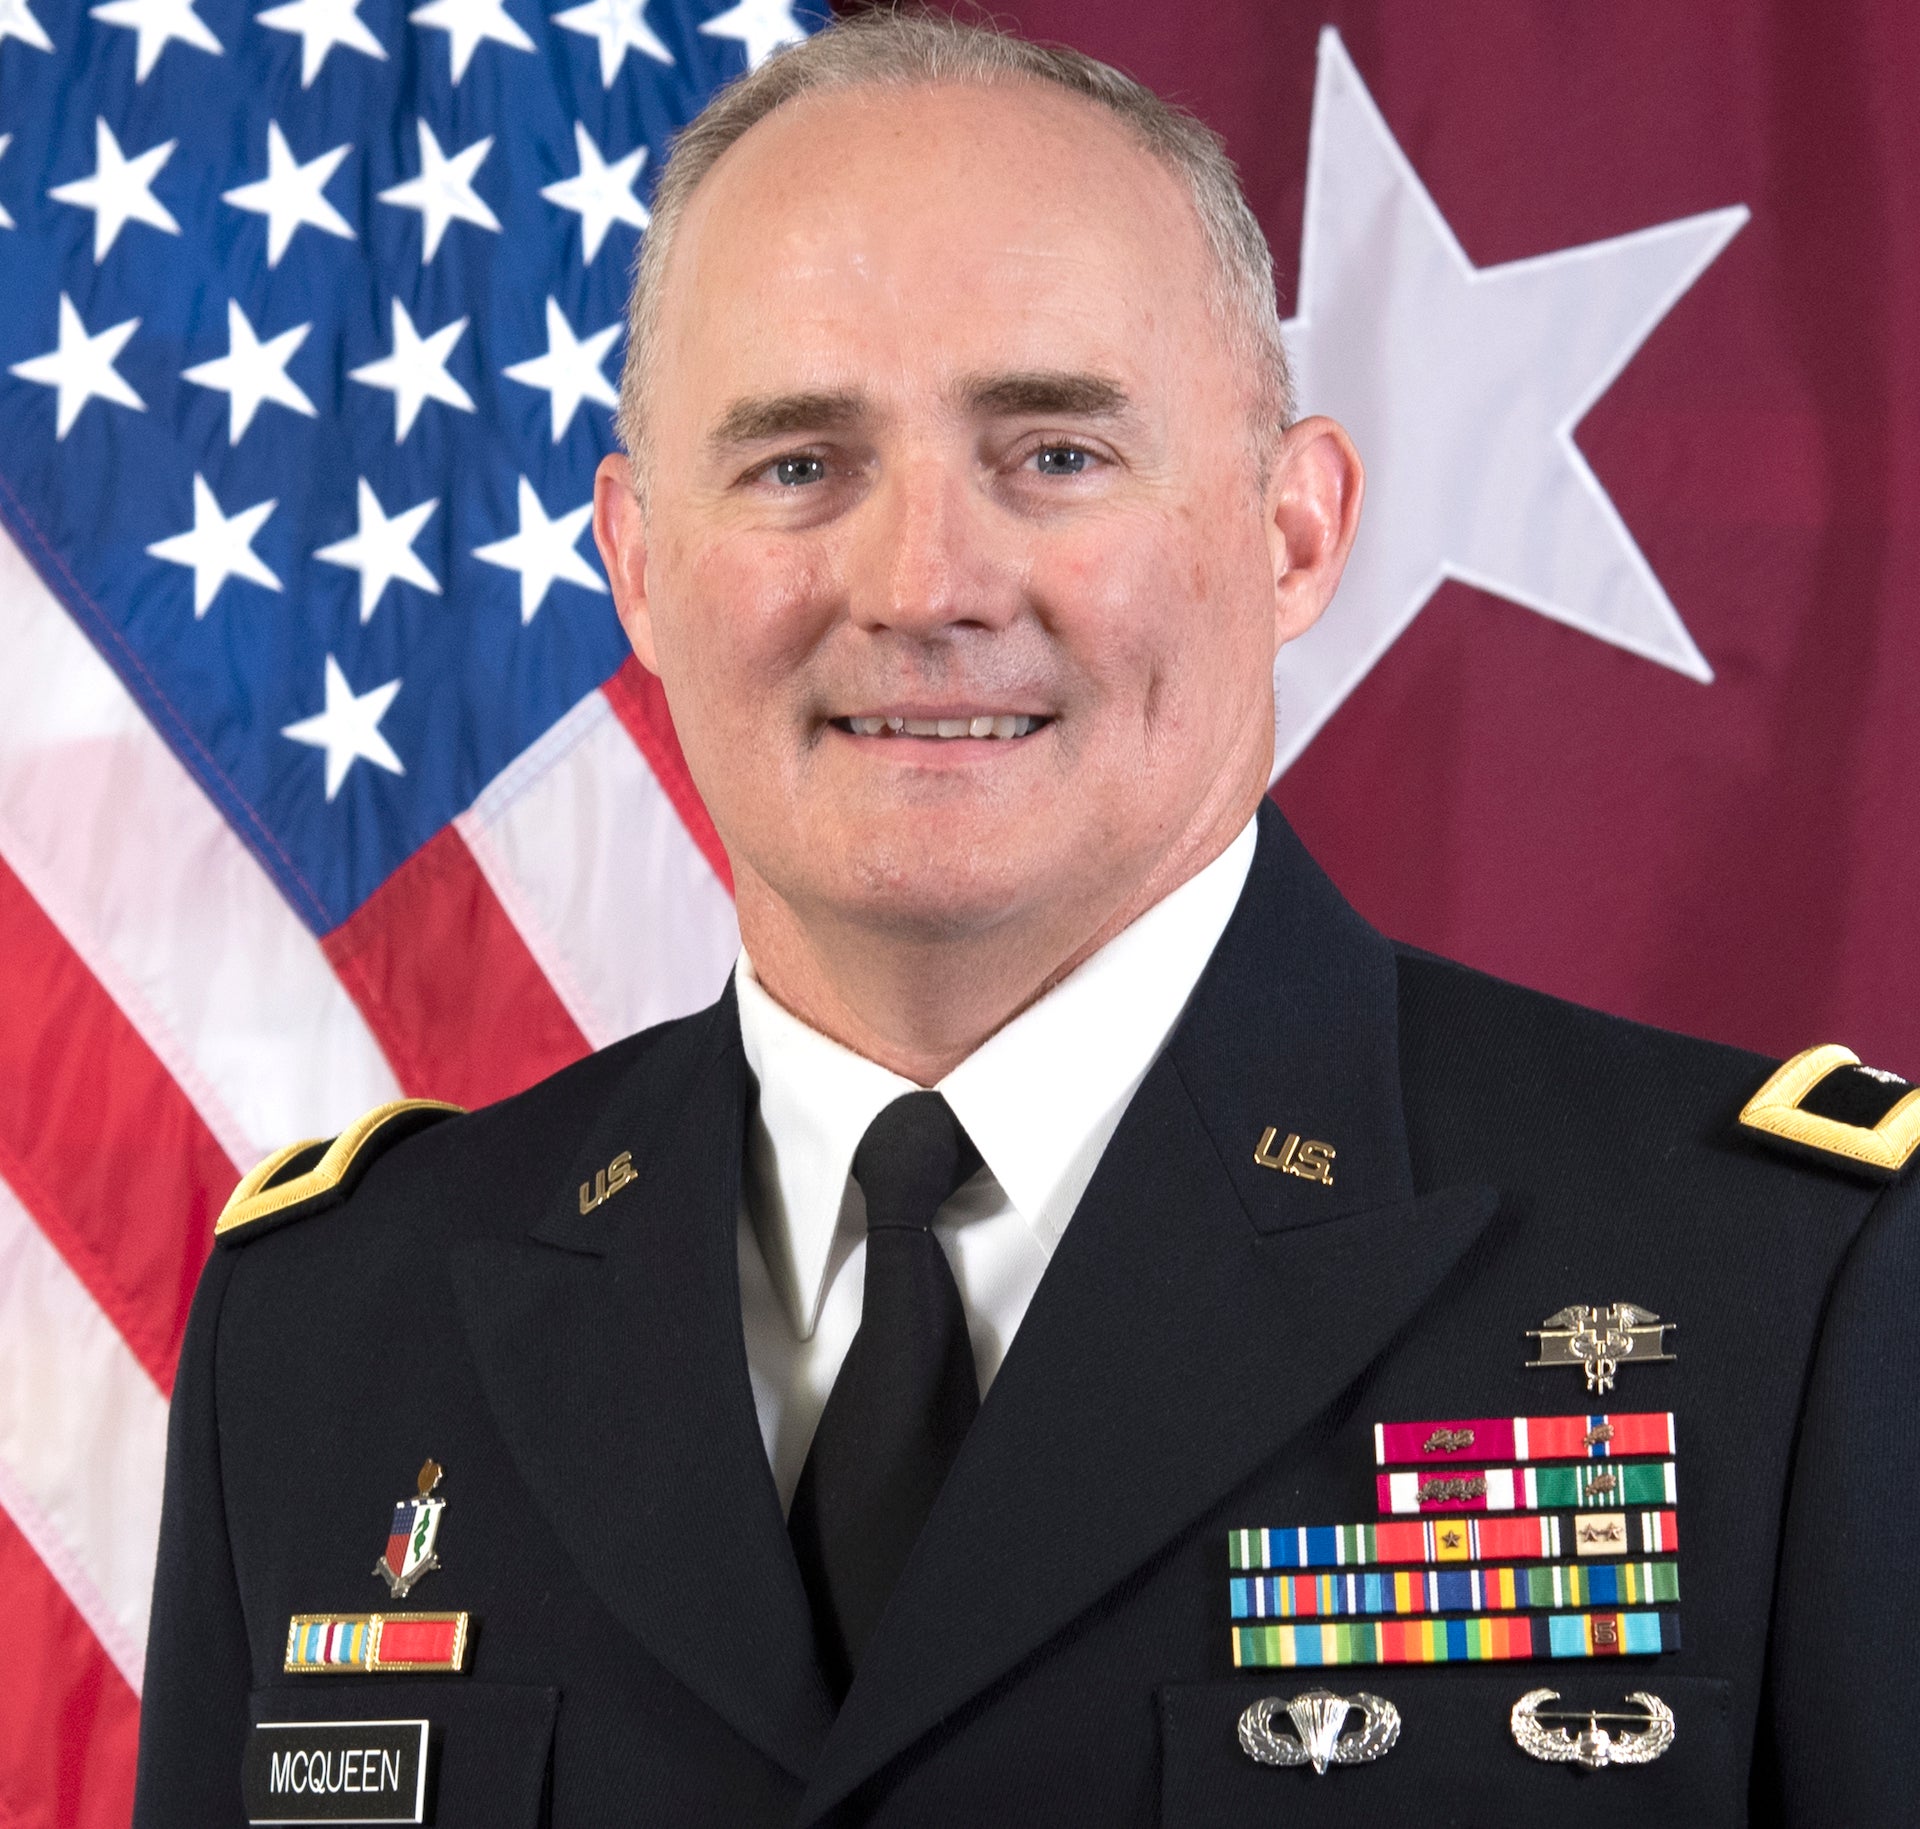 Official photograph of Brig. Gen. Anthony McQueen, Commanding General of the U.S. Army Medical Research and Development Command and Fort Detrick, Maryland. (Photo Credit: USAMRDC Public Affairs)